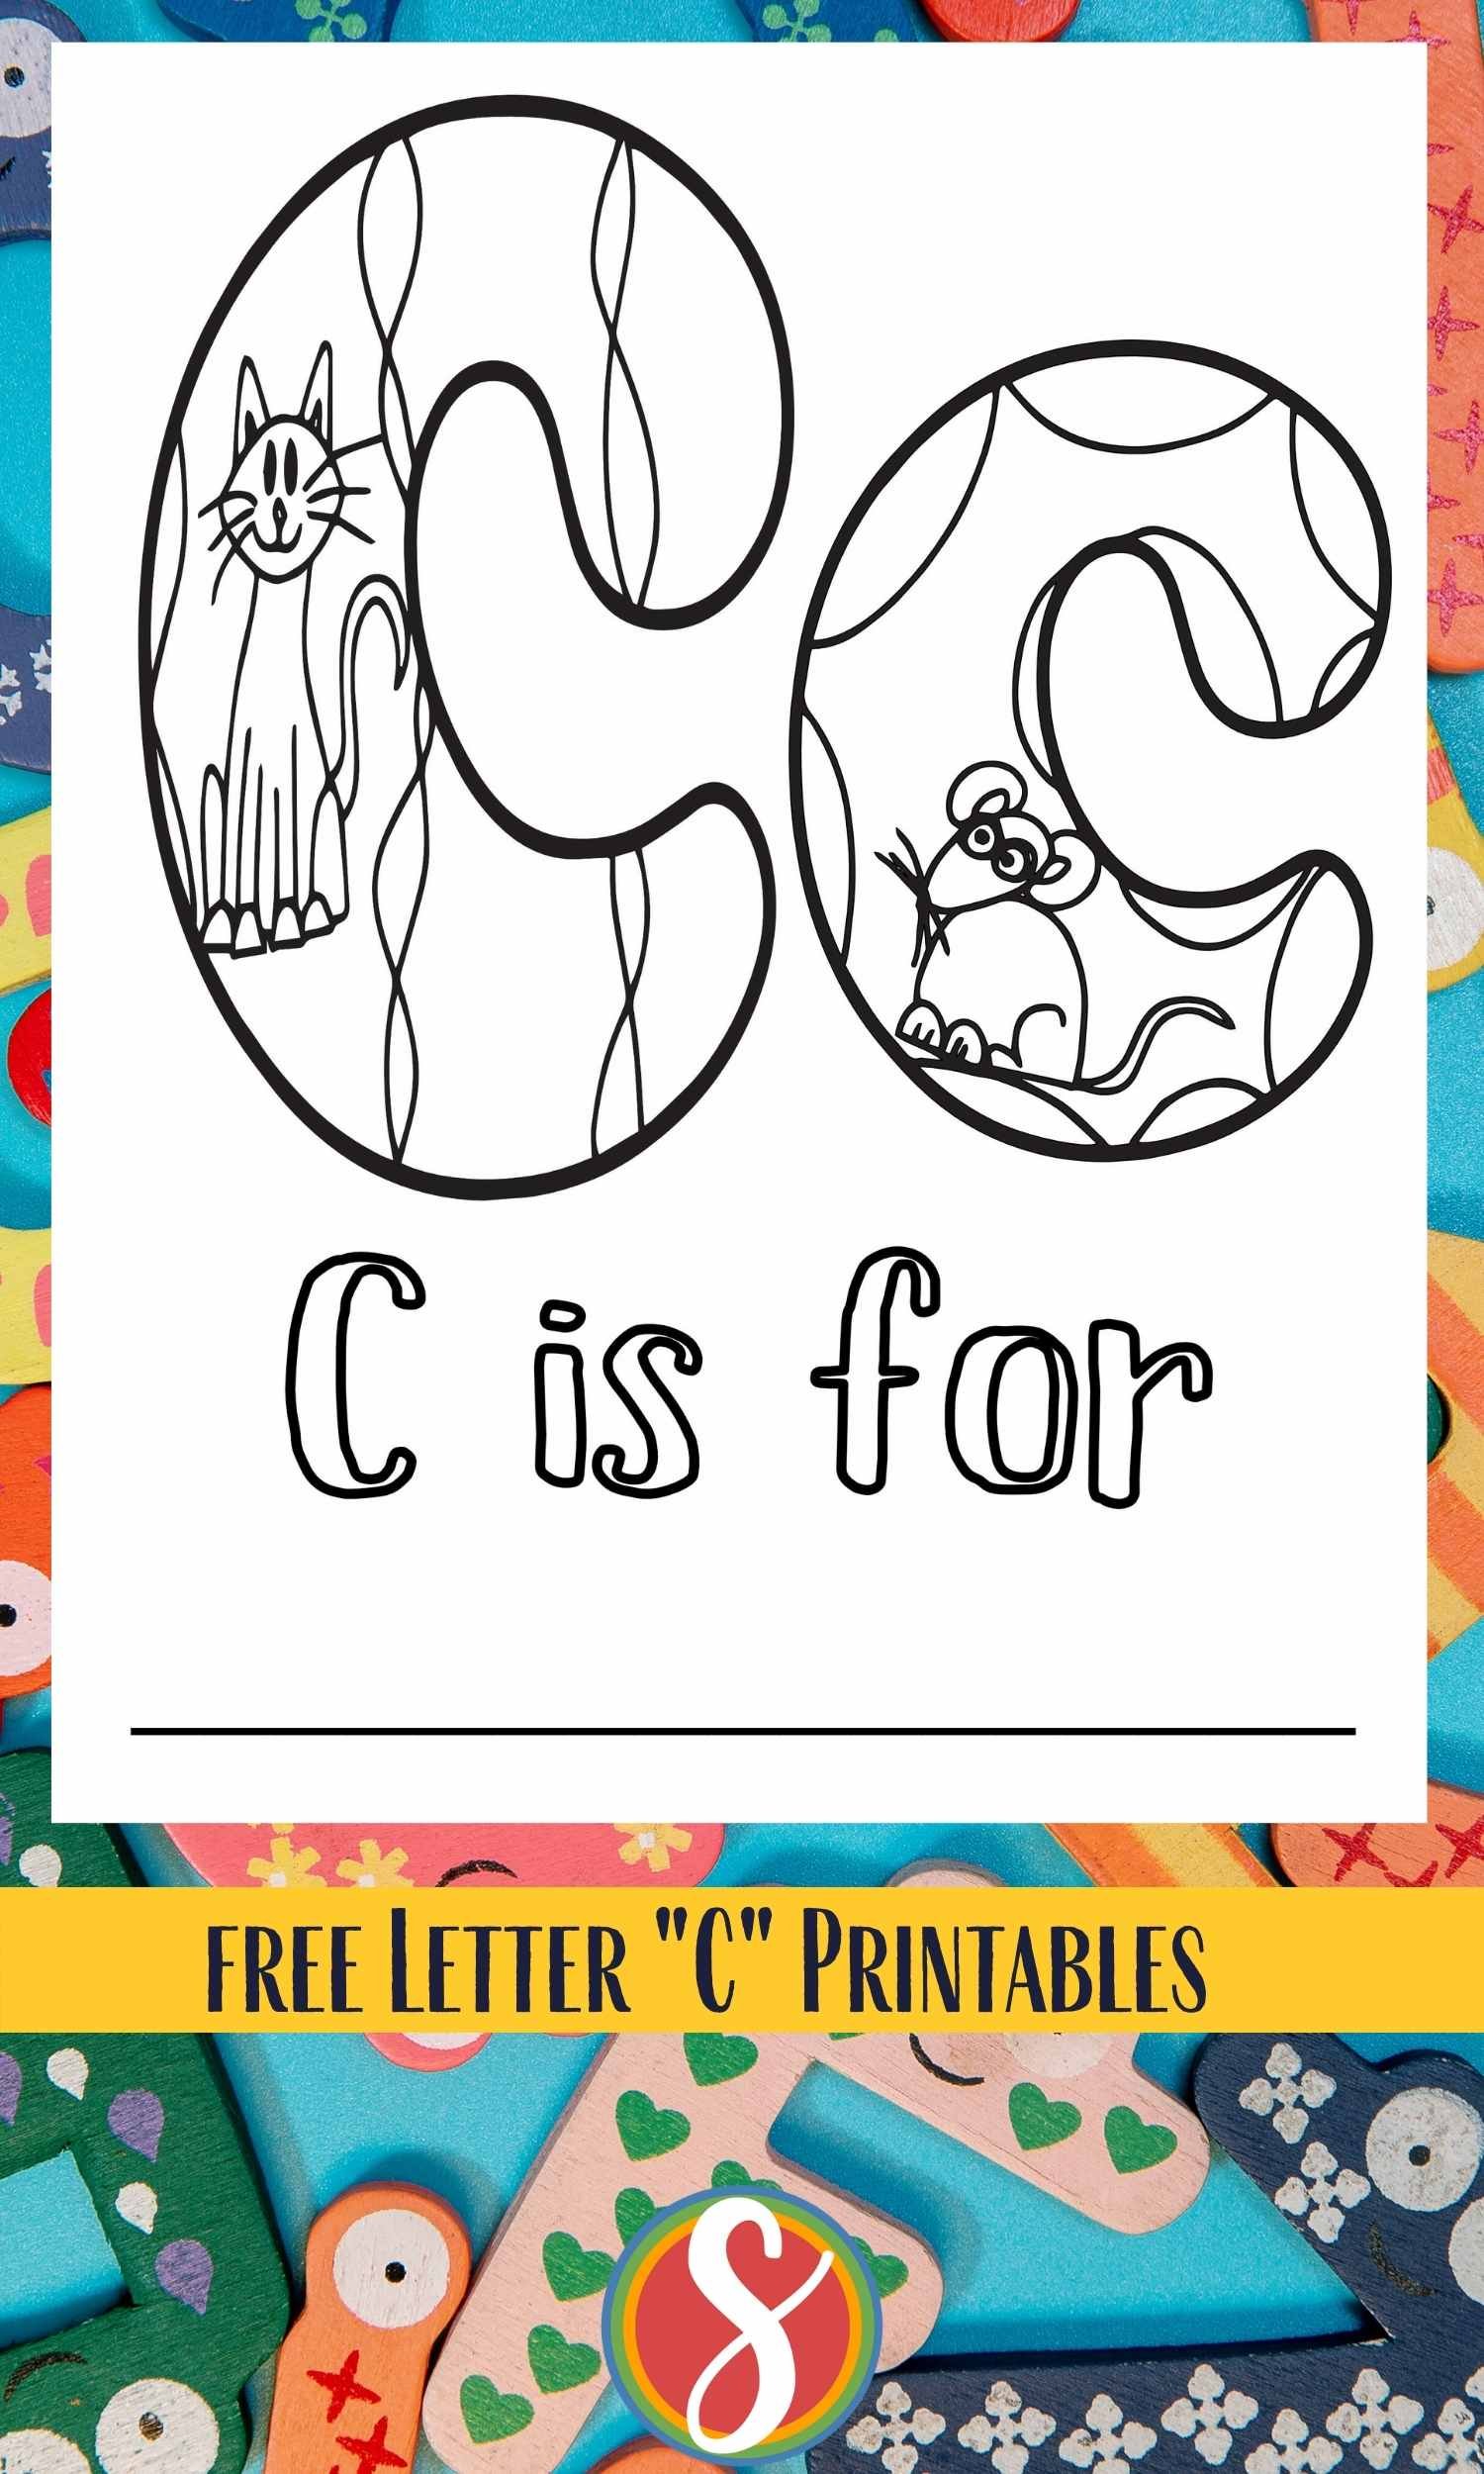 c coloring sheet, big c and little c, bubble letters, one with cat inside, one with mouse